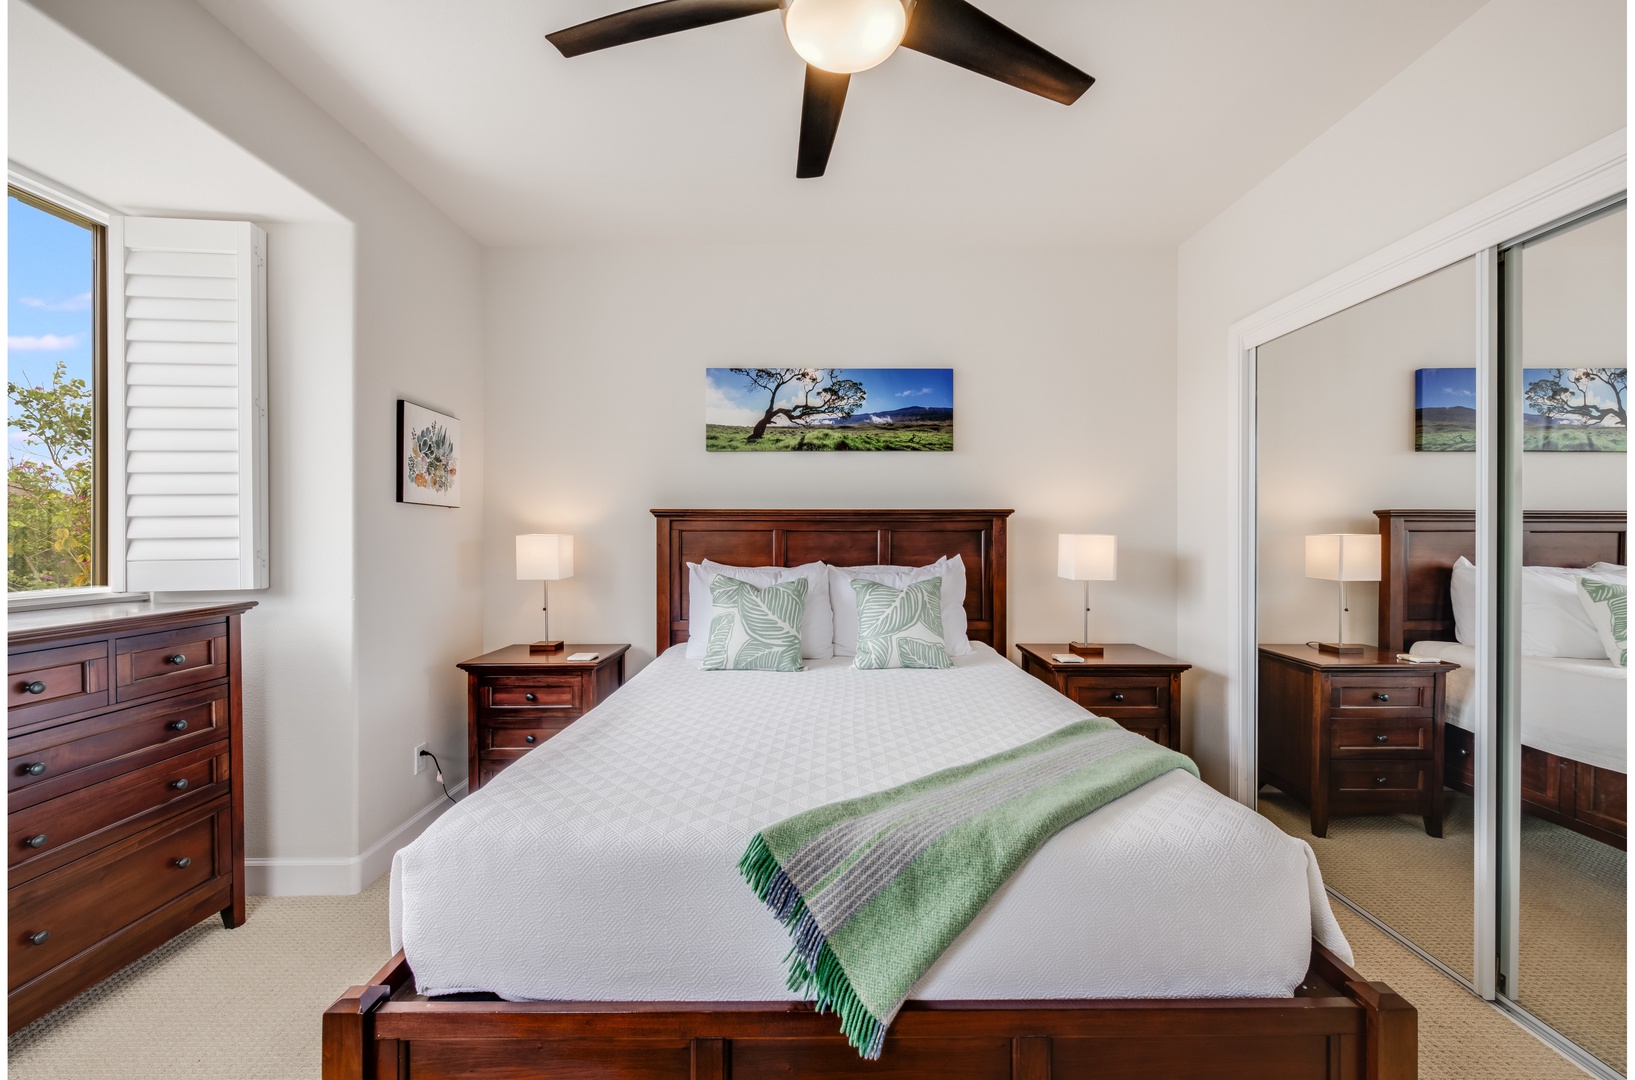 Kamuela Vacation Rentals, Kulalani at Mauna Lani 804 - The guest bedroom comes with a queen bed, ceiling fan, and an ensuite bathroom with a shower/tub combo